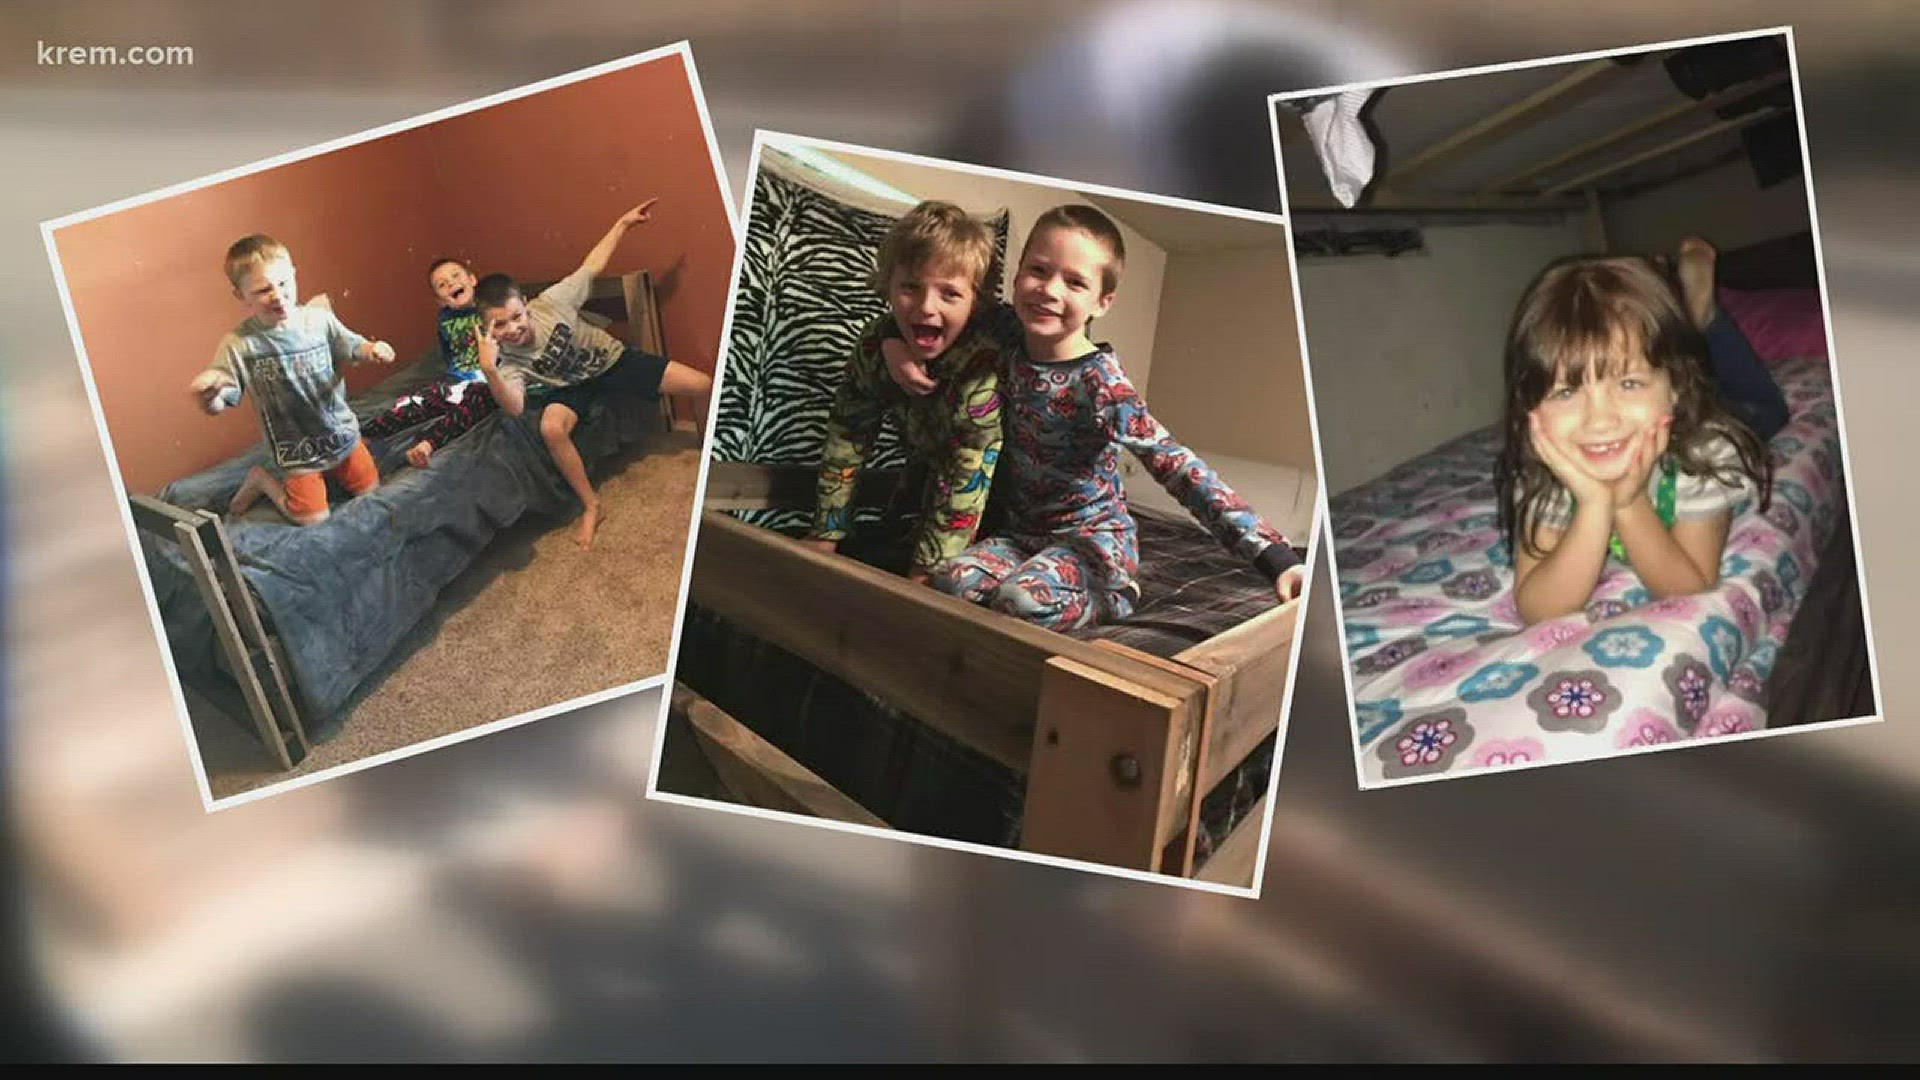 Local charity makes beds for Inland Northwest children